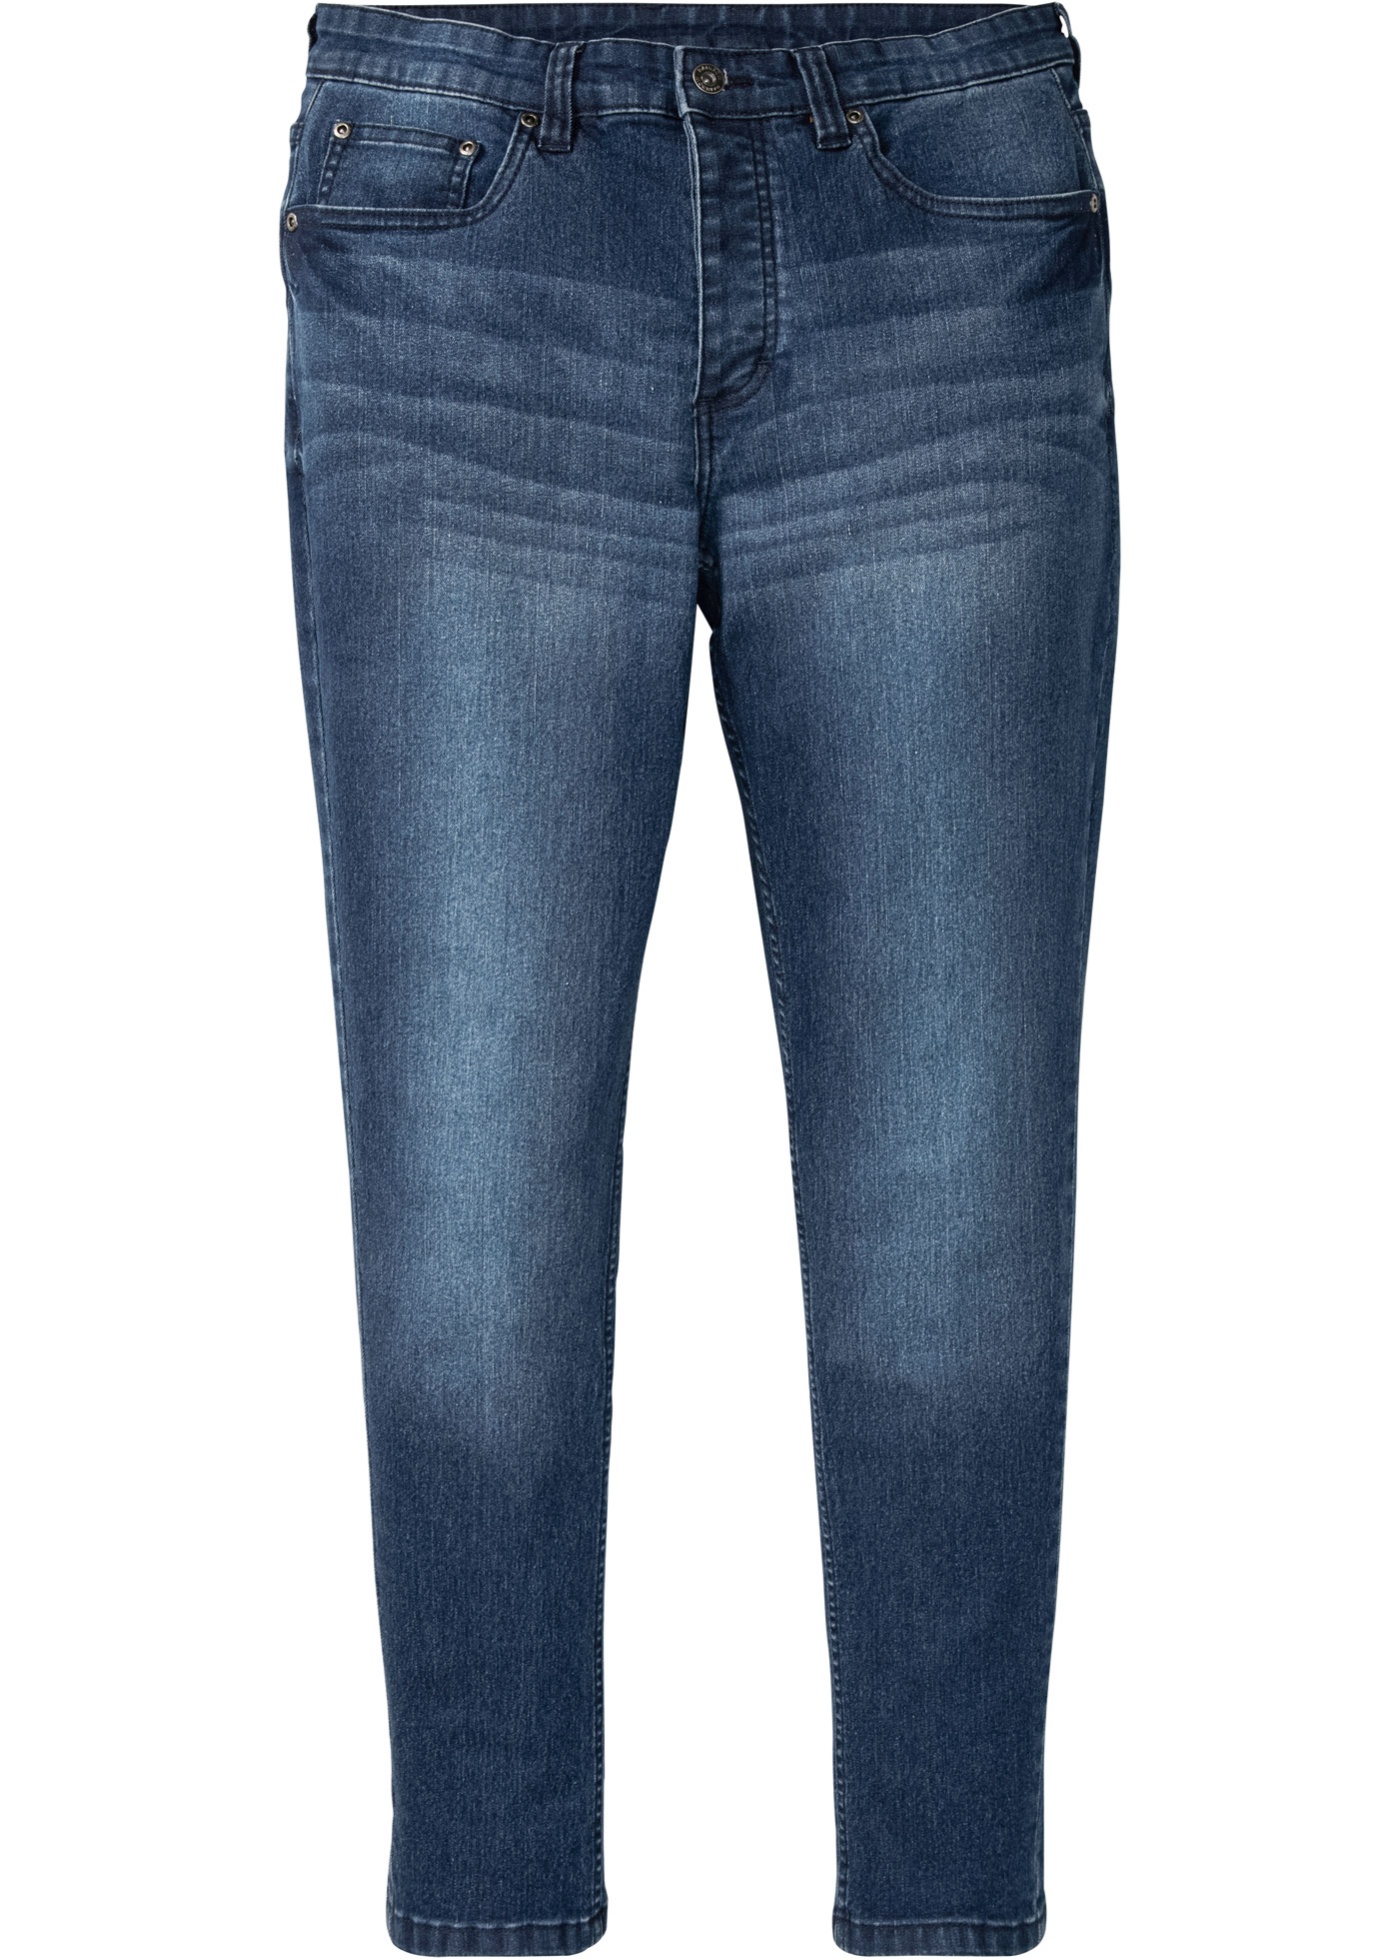 Regular fit stretch jeans, cropped, tapered